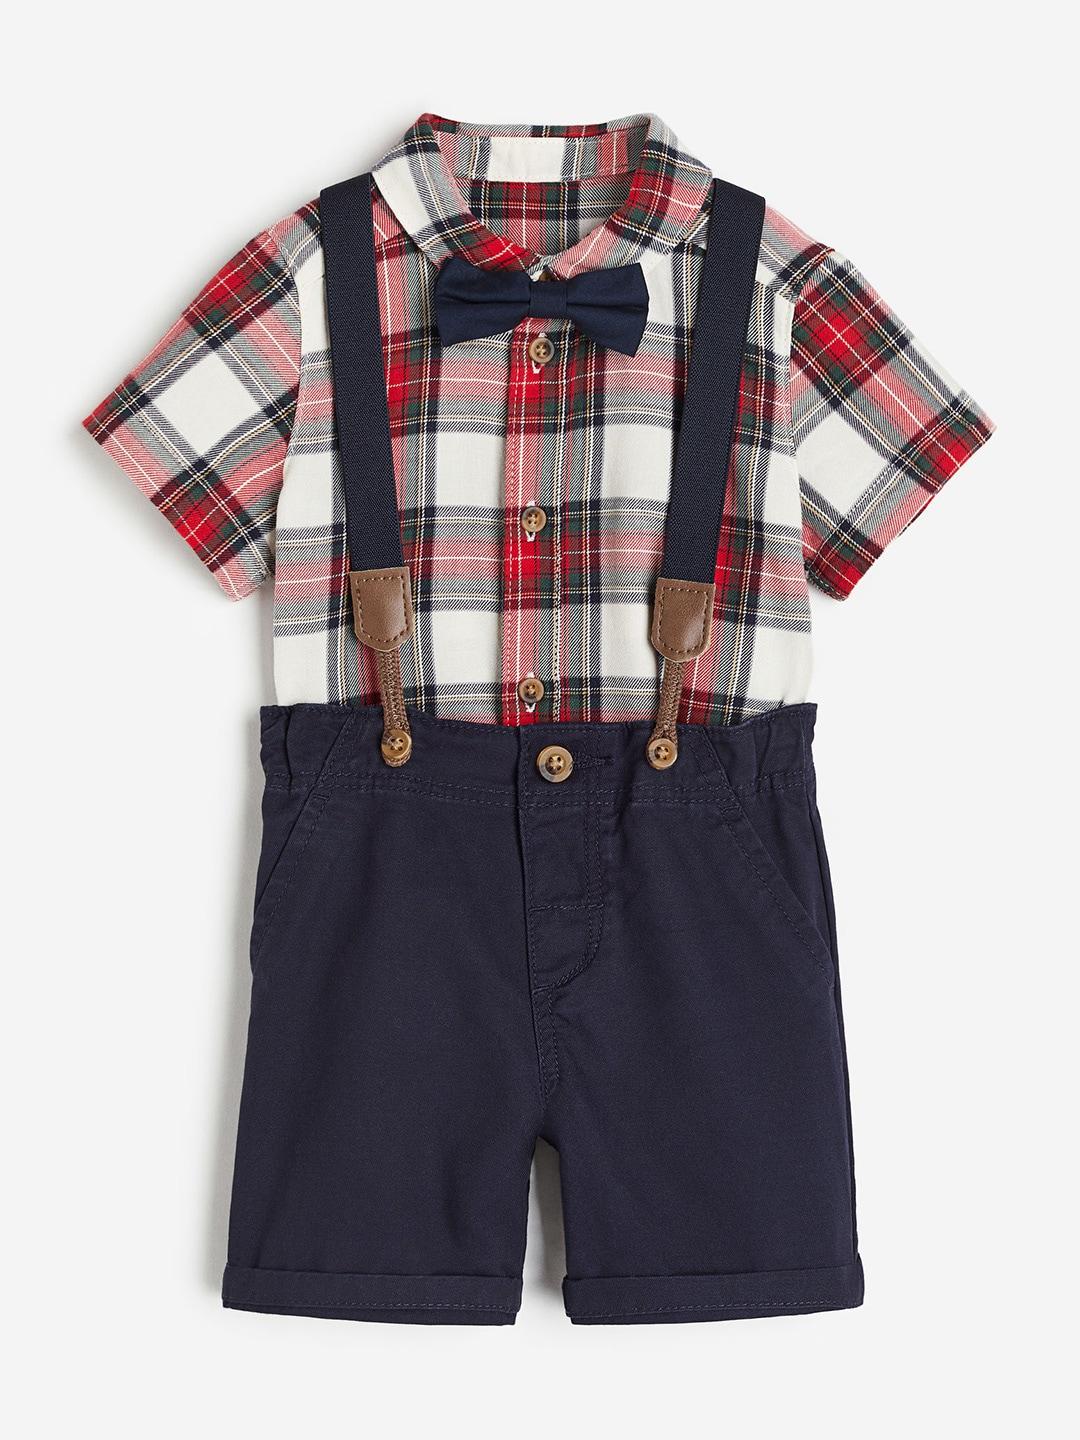 h&m boys checked shirt & shorts with bow